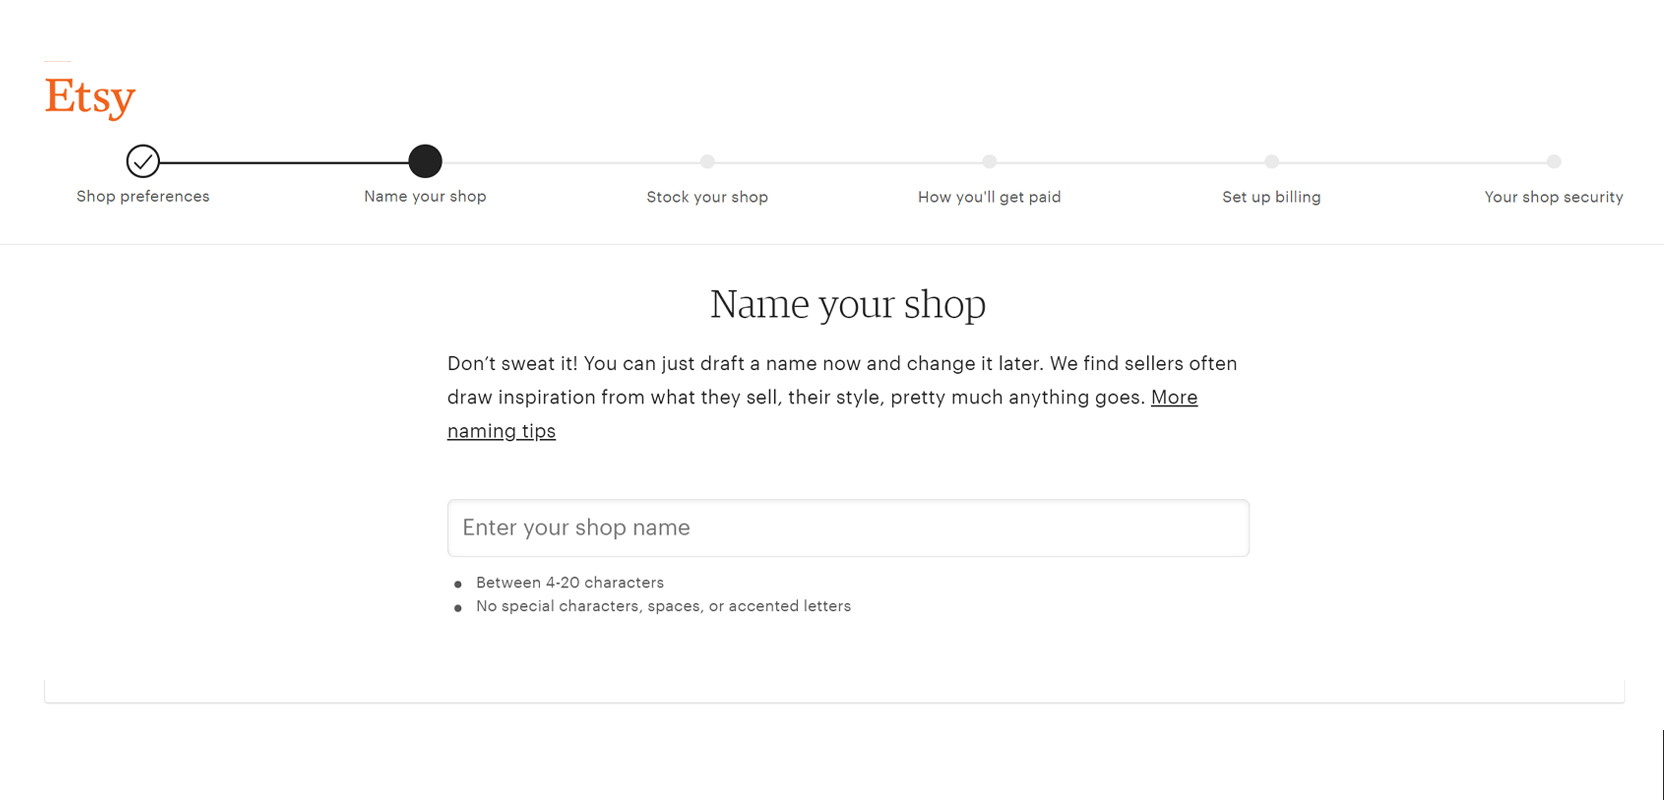 Screenshot of the Etsy "name your shop" page